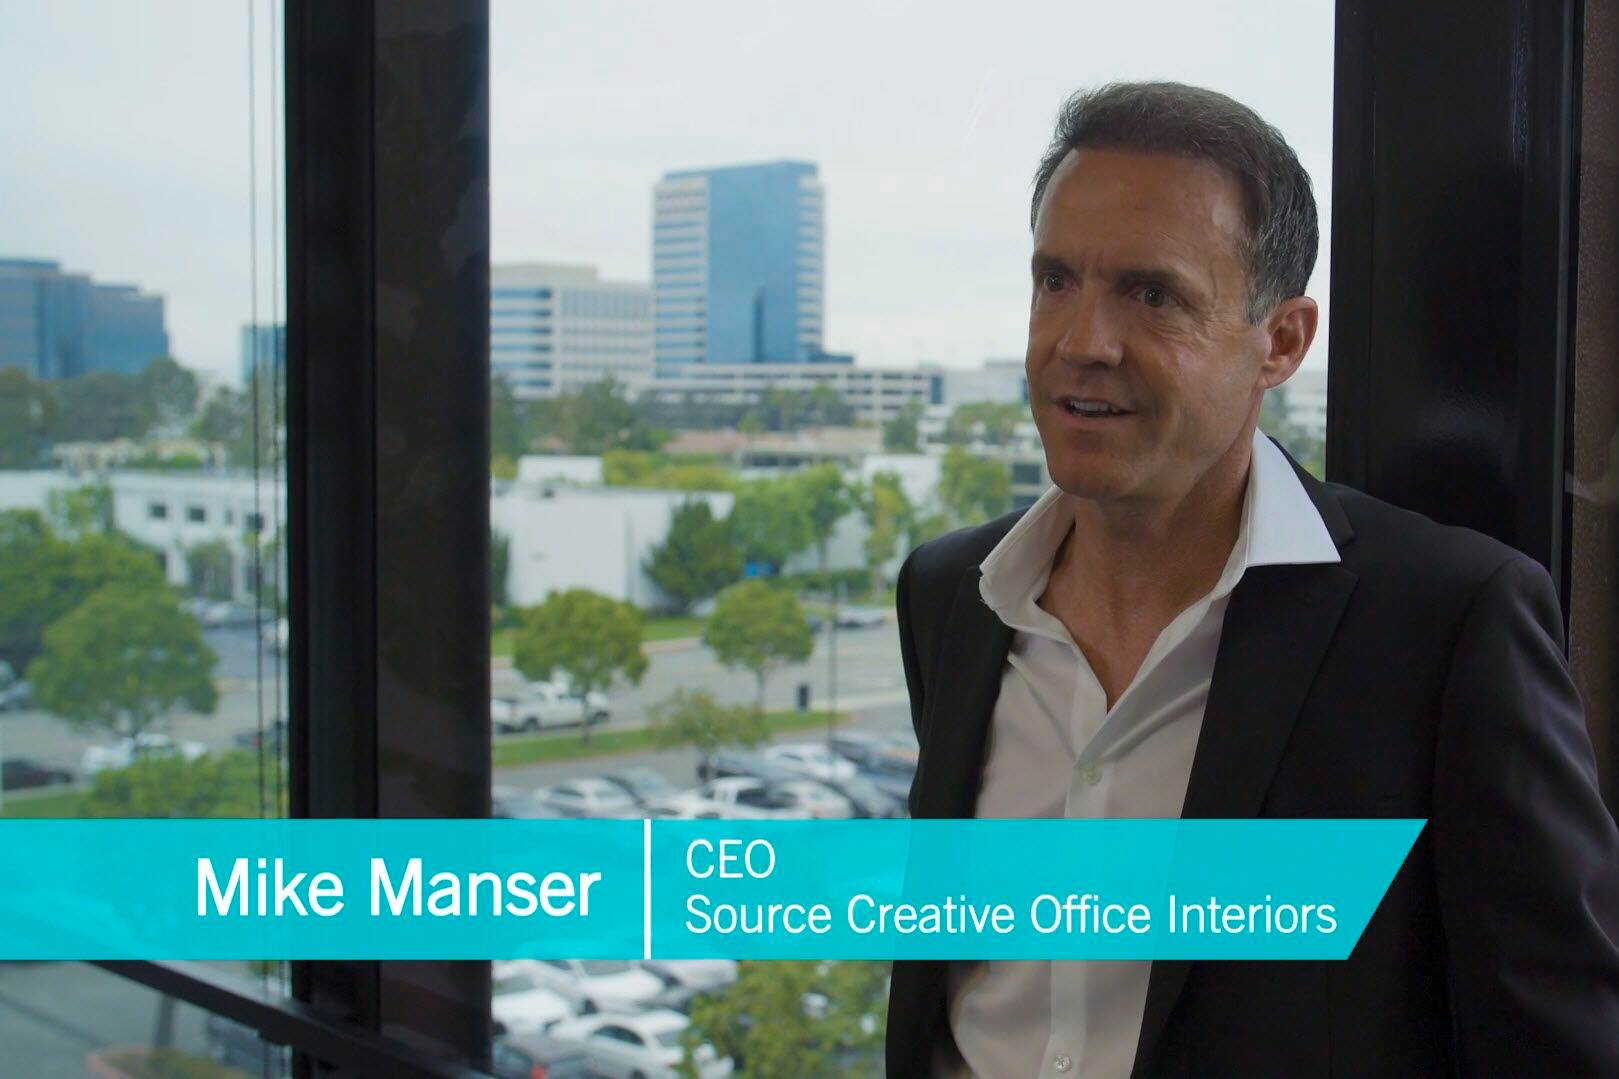 Video testimonial preview for The Launch featuring Mike Manser, CEO of Source Creative Office Interiors located in Irvine, CA.